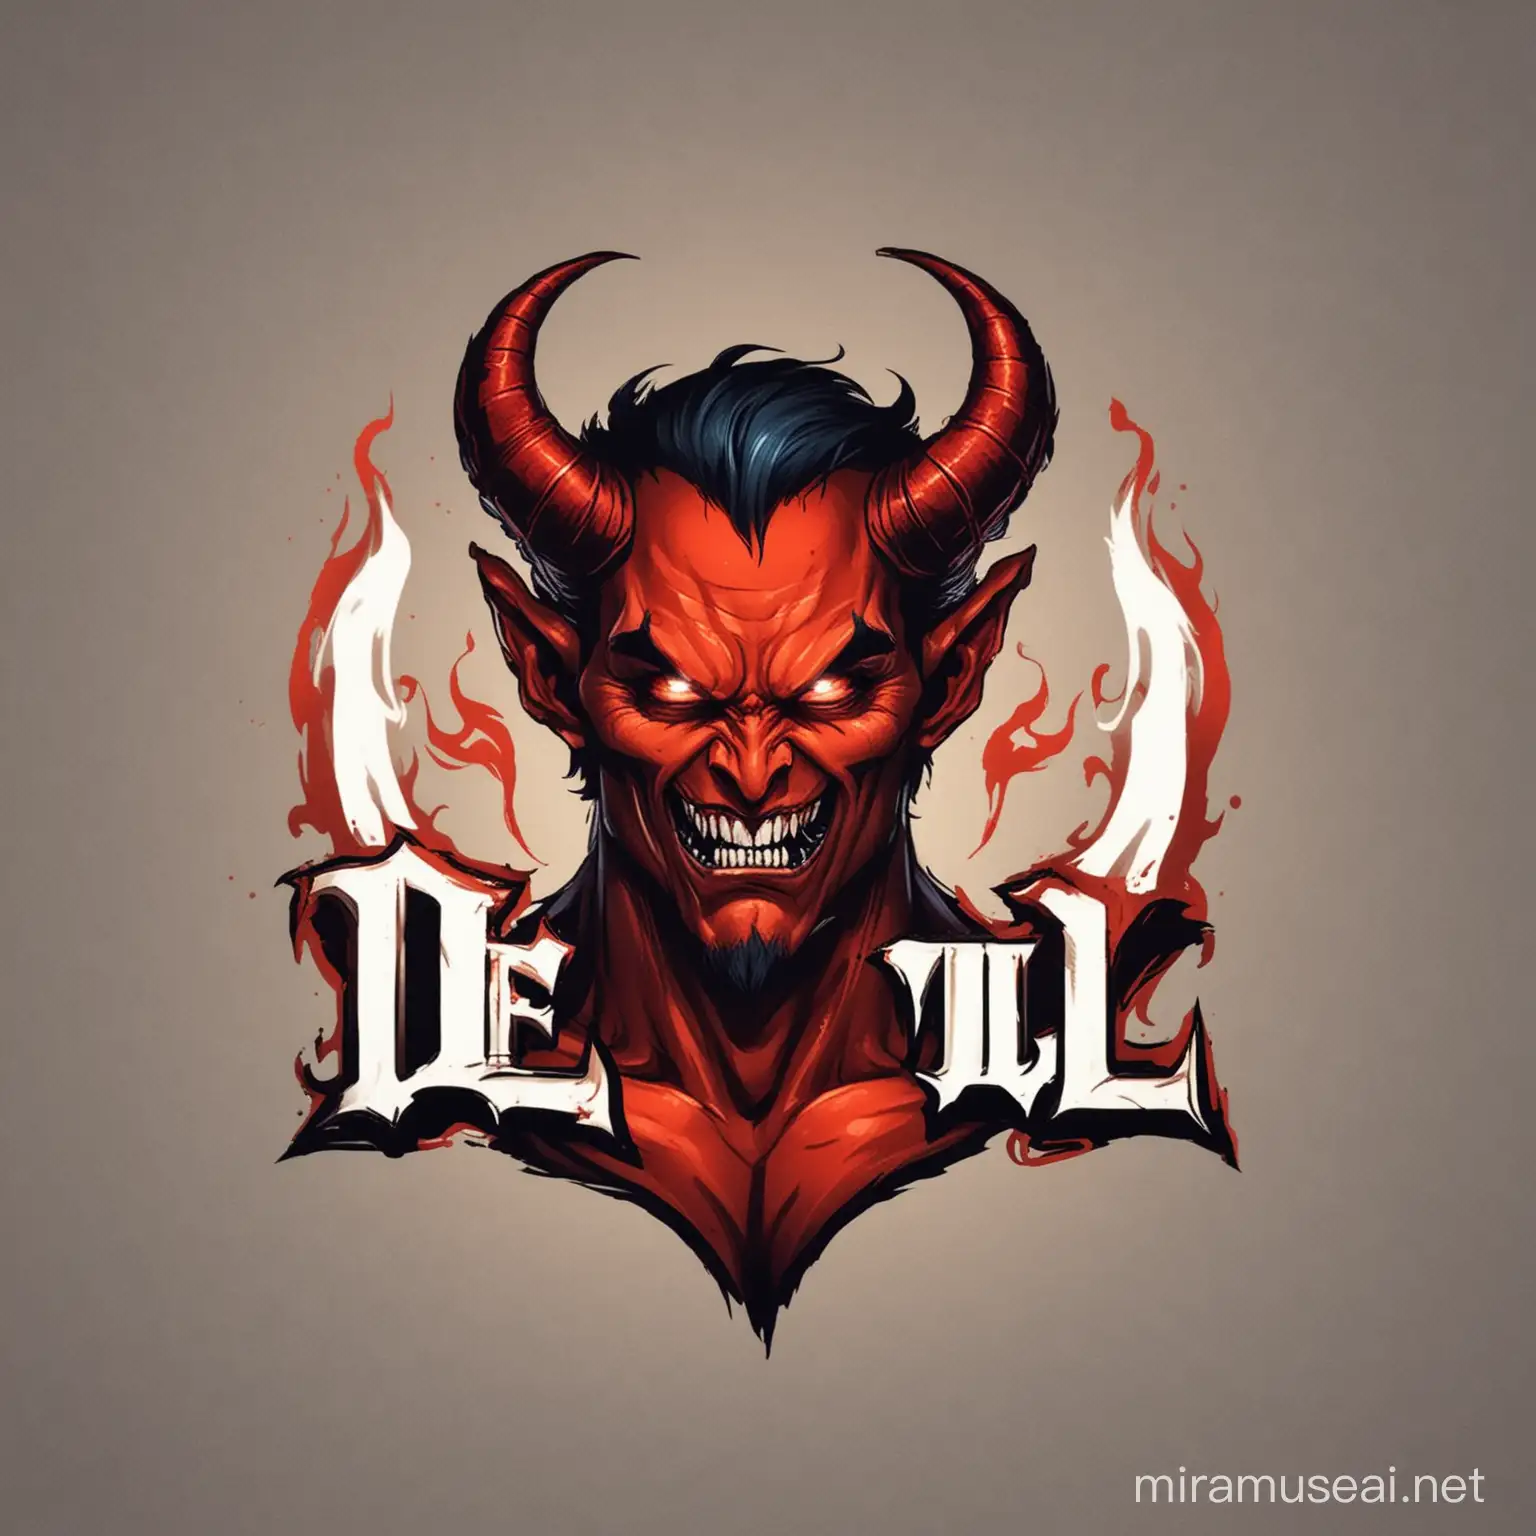 Sinister Devil Logo with Fiery Red Palette